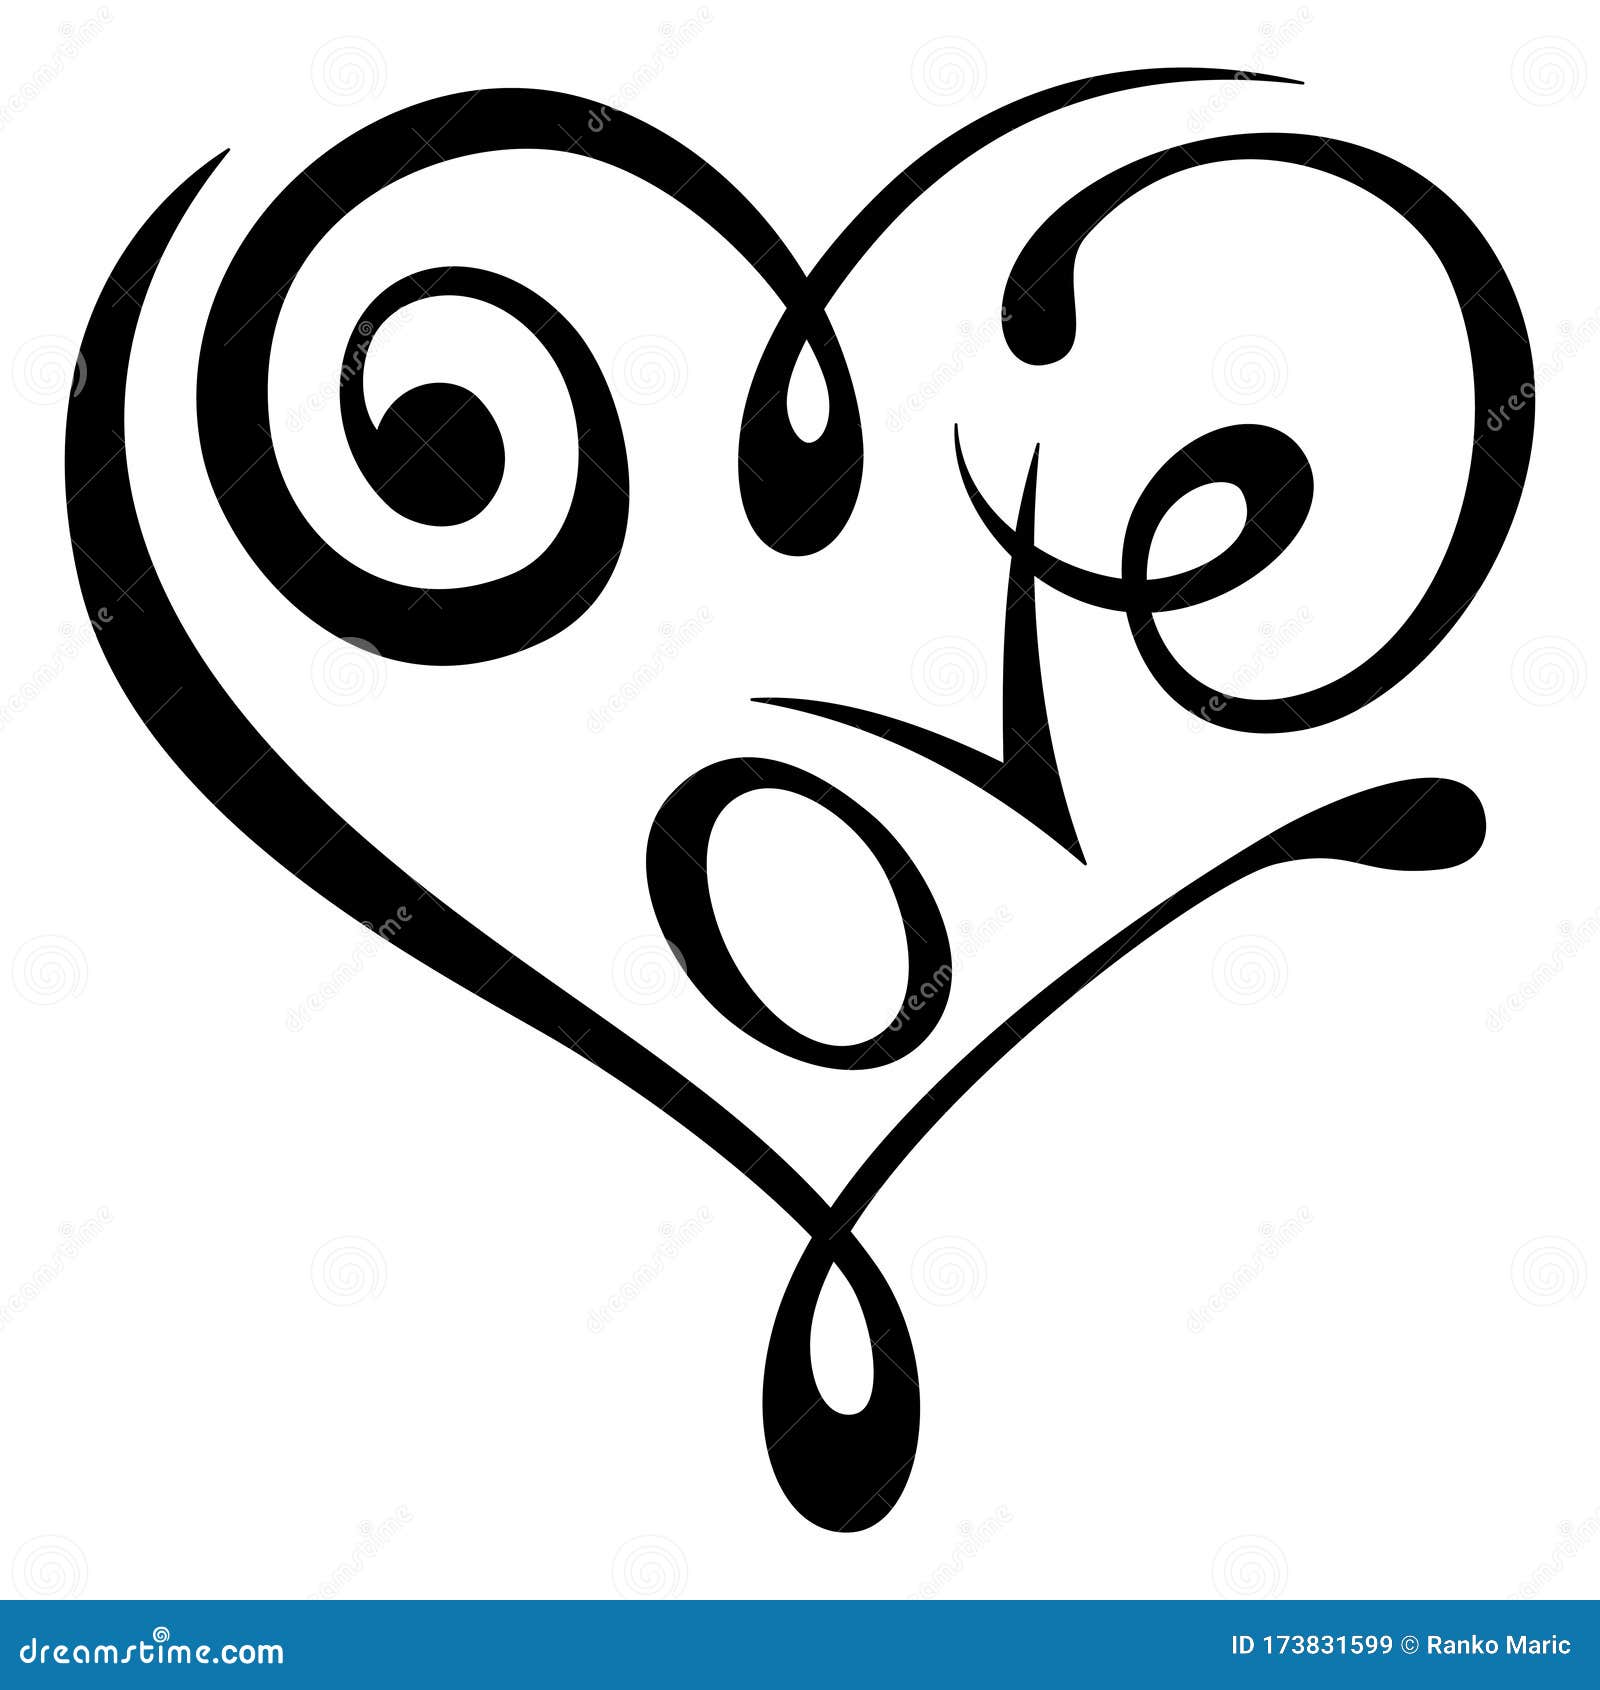 Heart in Love Black and White Tribal Tattoo with Curly Lines Stock Vector -  Illustration of sign, icon: 173831599